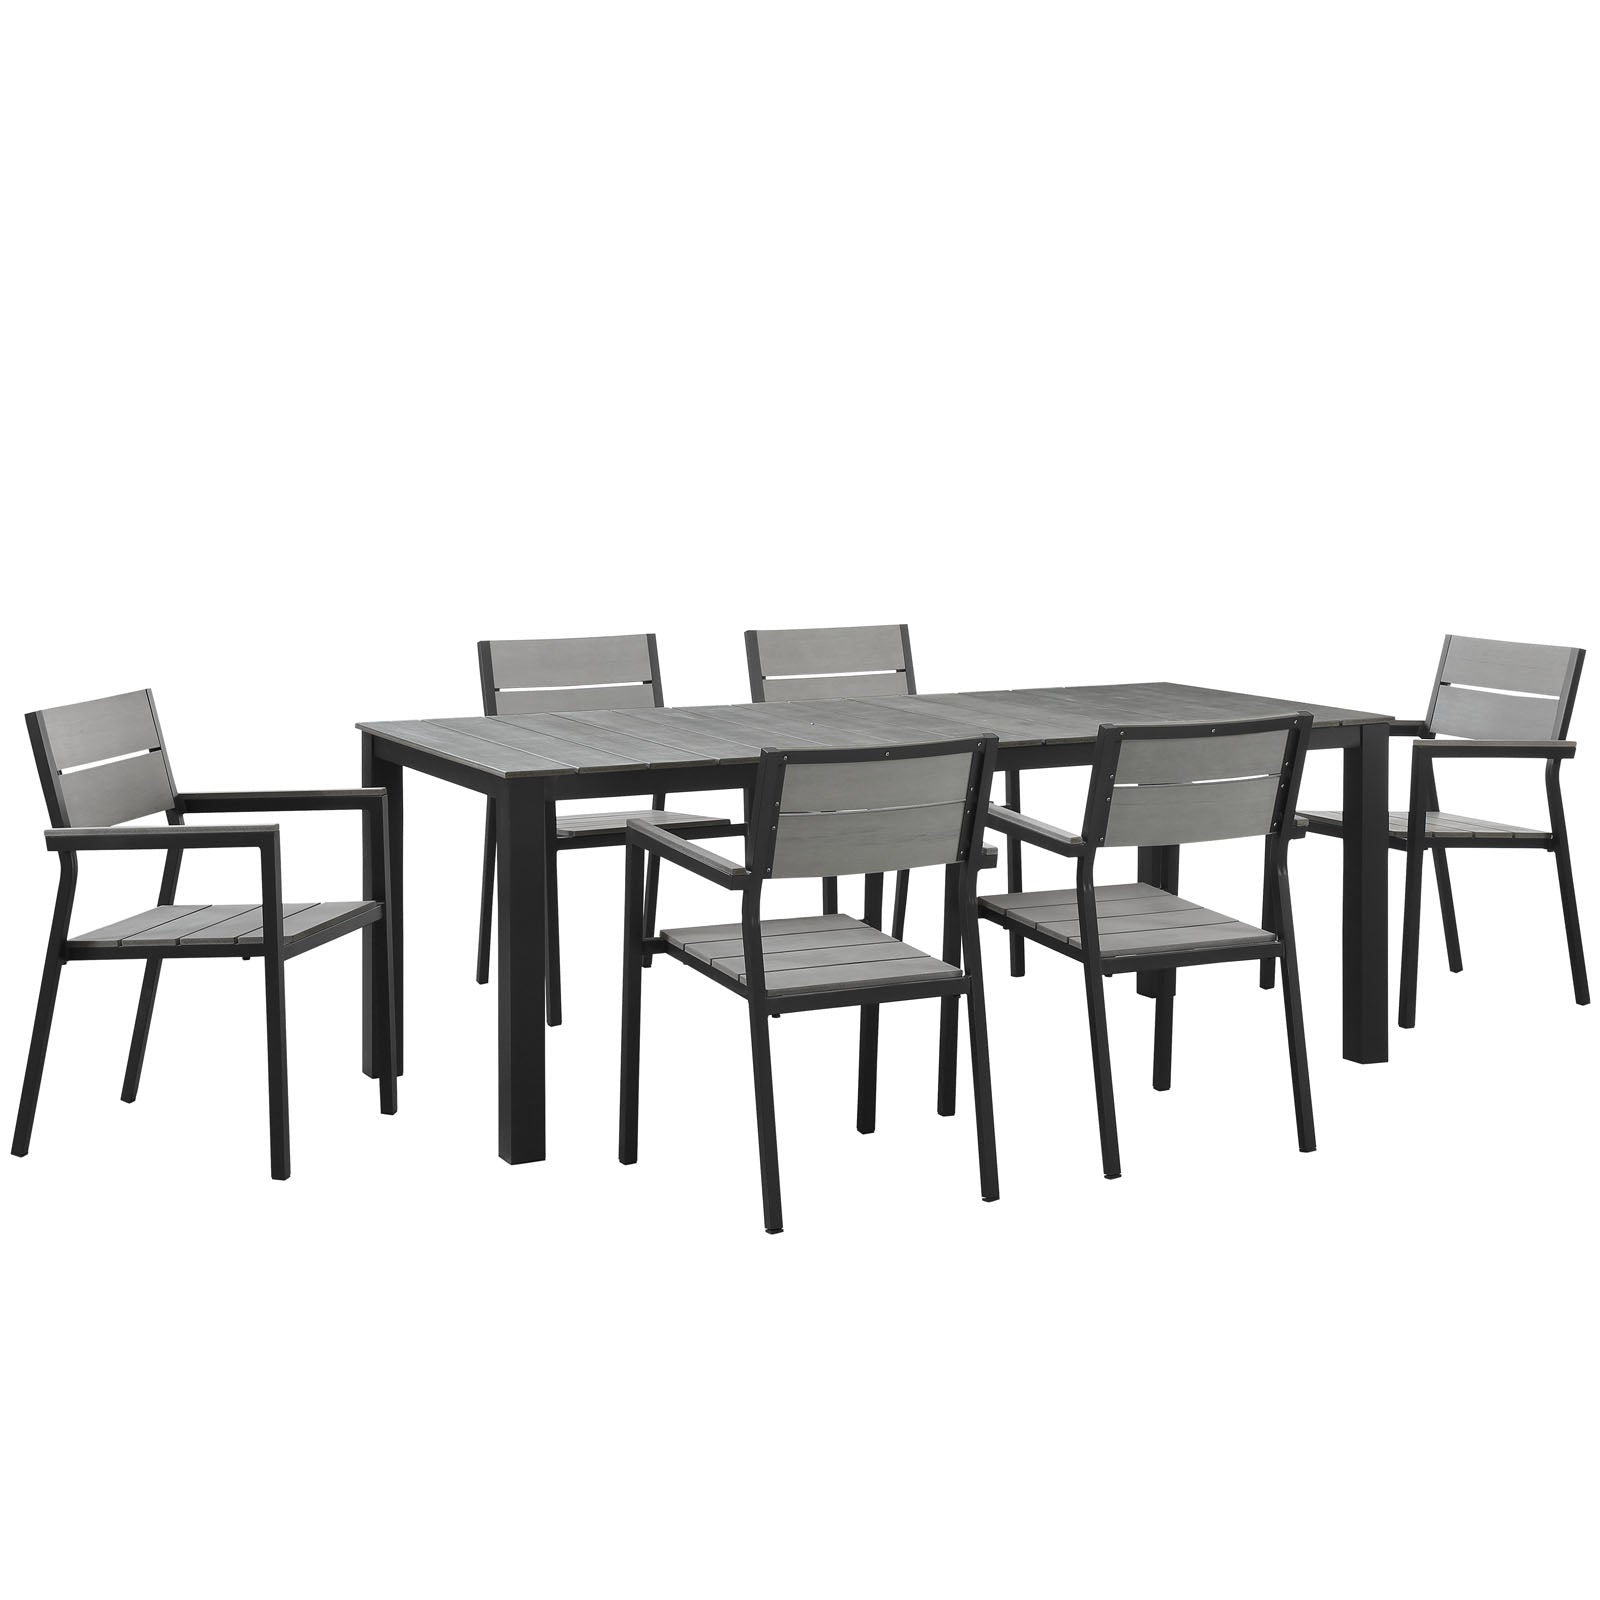 Maine 7 Piece outdoor Patio Dining Set - Wooden Dining Room Table